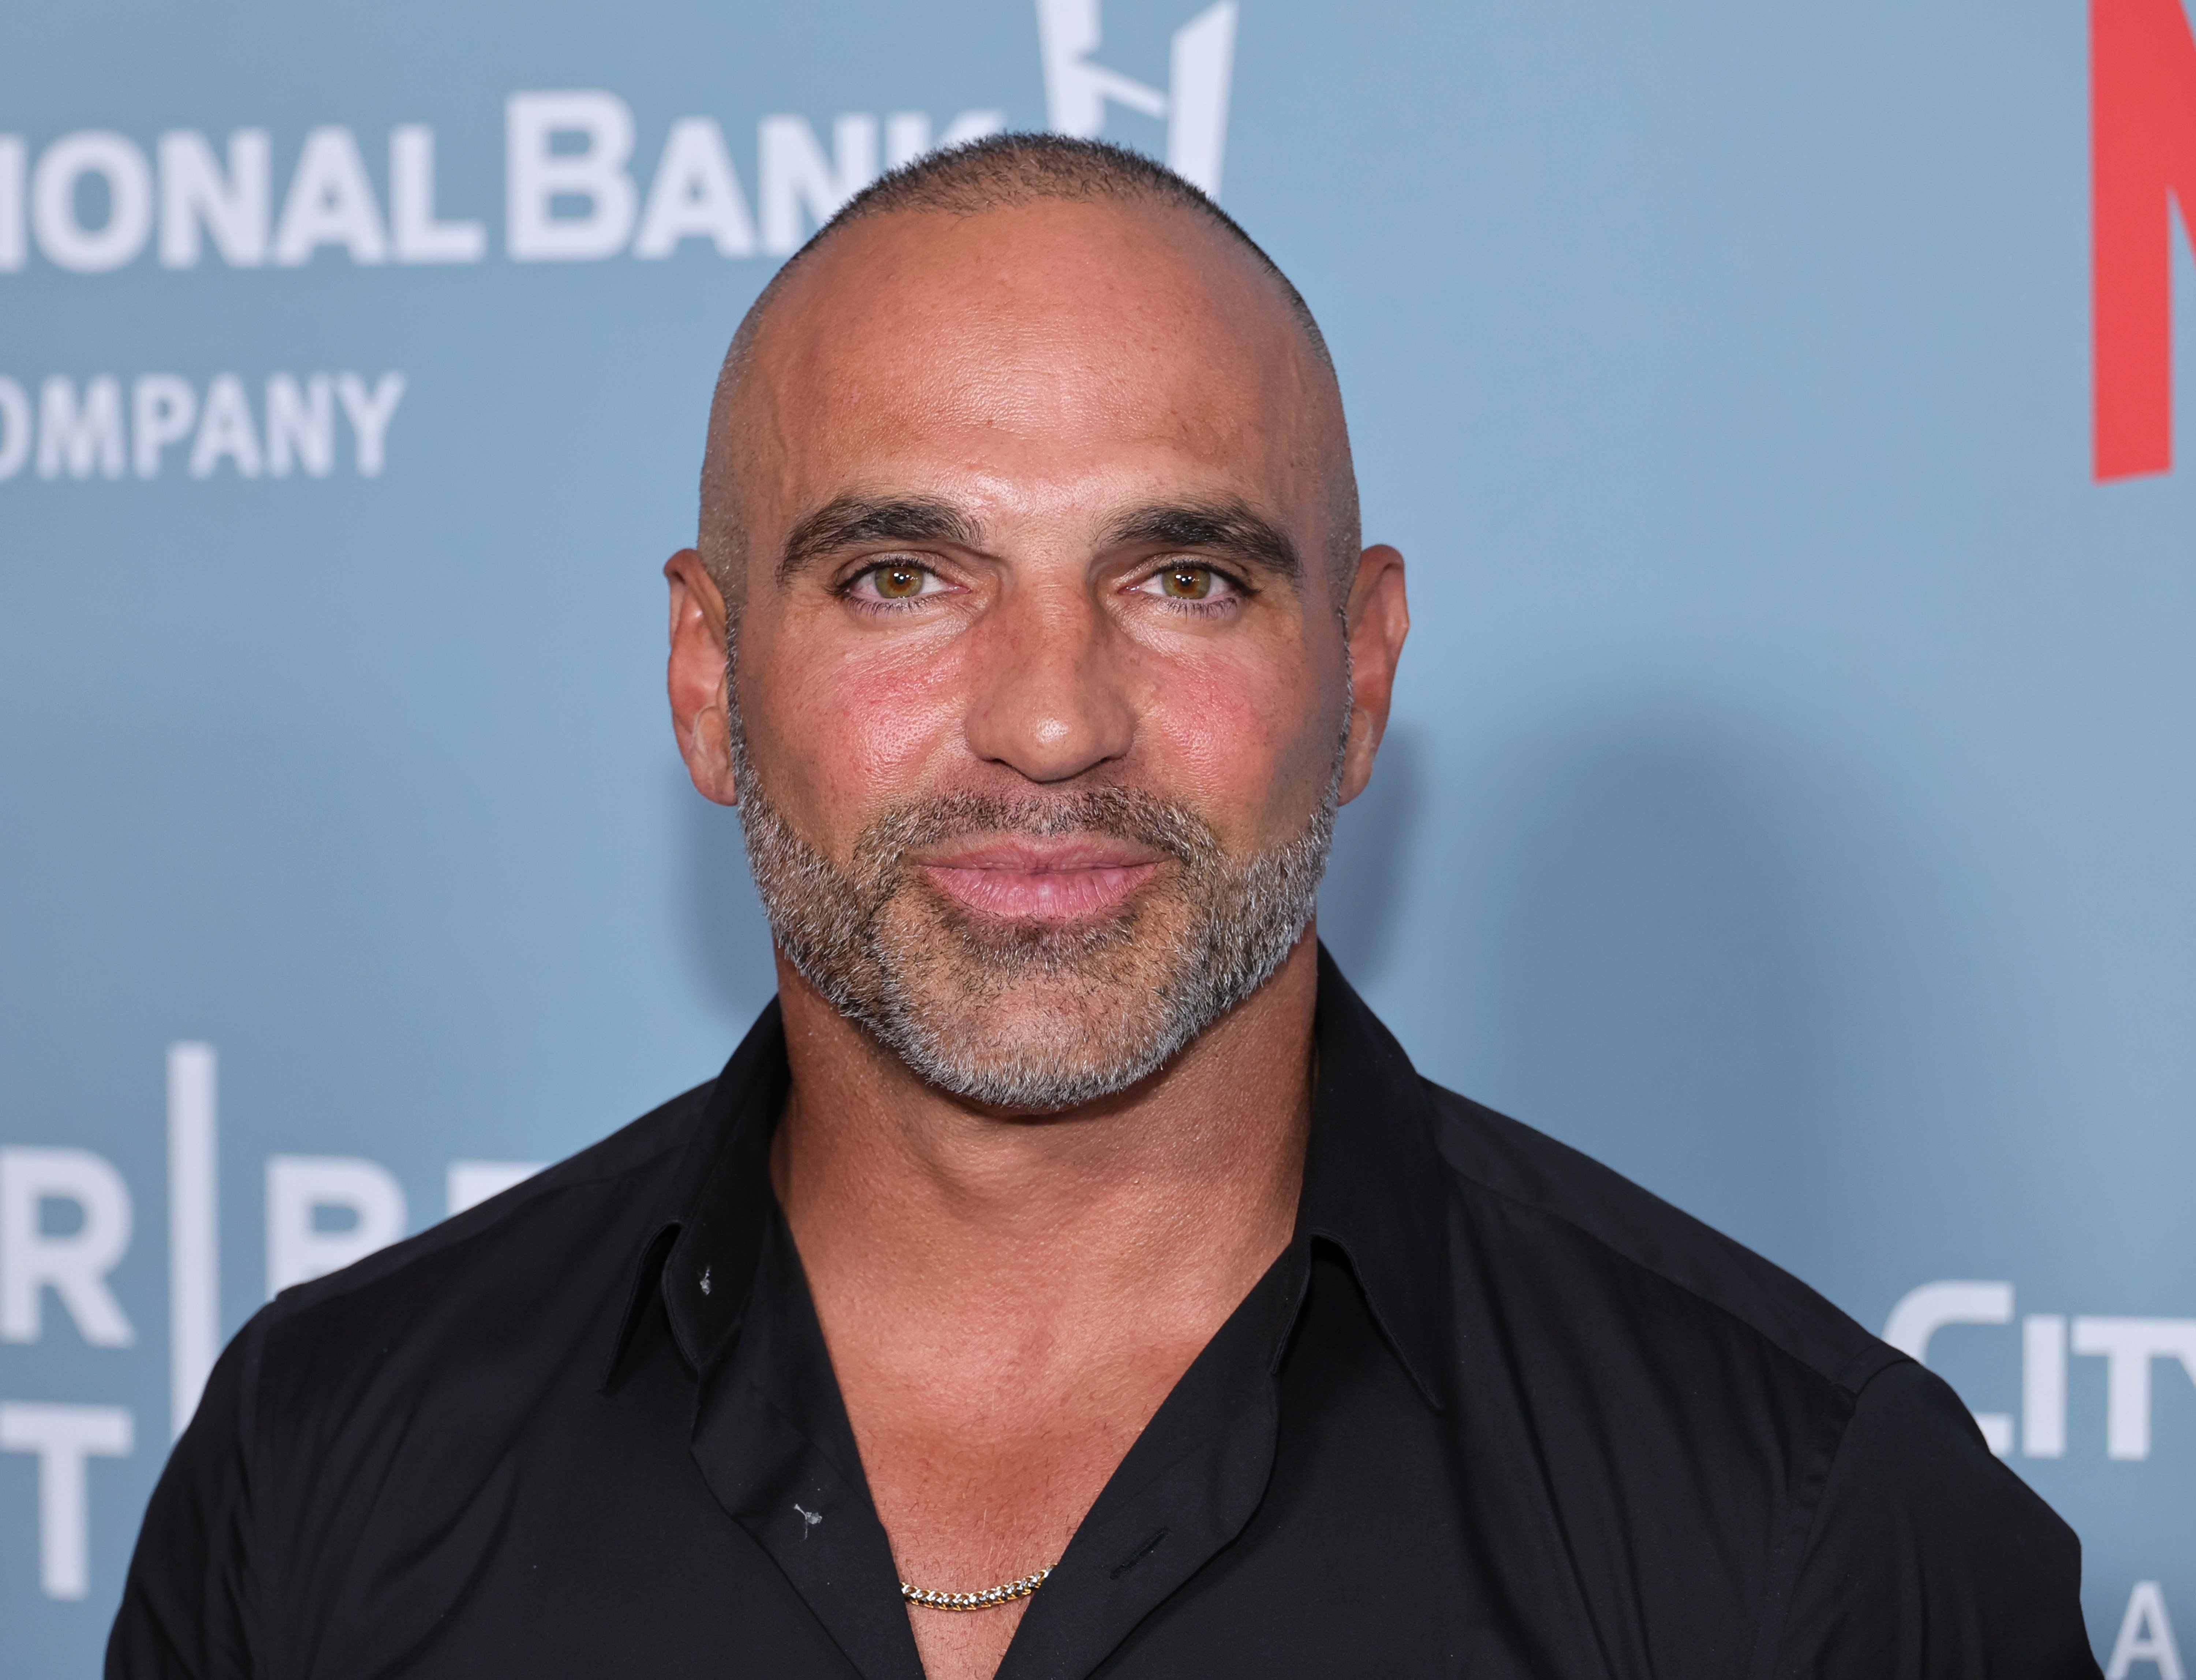 Joe Gorga attends the "Halftime" Premiere during the Tribeca Festival Opening Night on June 08, 2022 in New York City. | Source: Getty Images